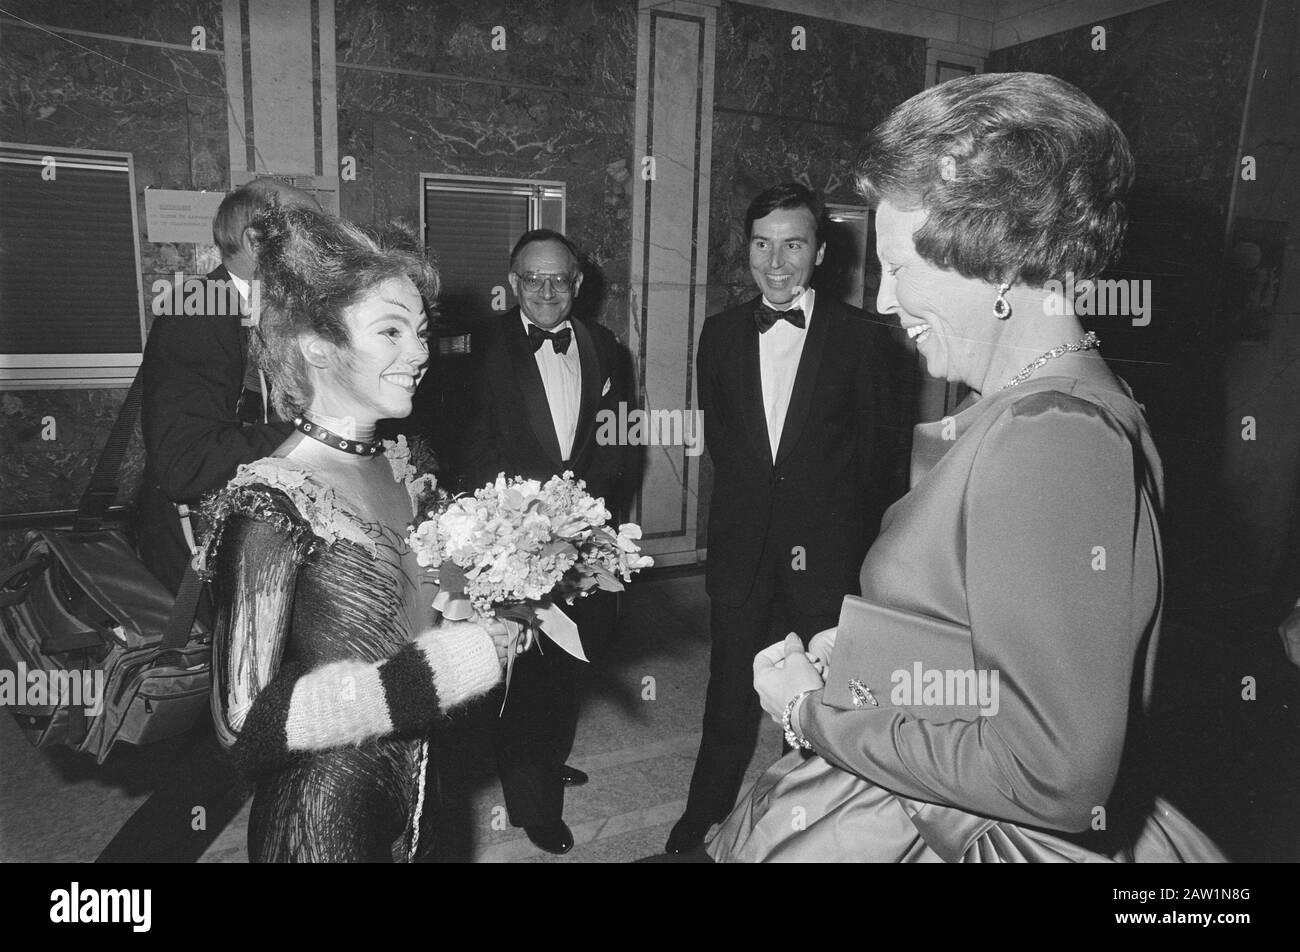 Opening event Amsterdam cultural capital of Europe in Amsterdam; Ball spout about individuals National Balle Carre and music, Beatrix gets flowers / Date: May 18, 1987 Location: Amsterdam, Europe Keywords: MUSIC THEATERS, events Person Name: Beatrix, Princess Stock Photo